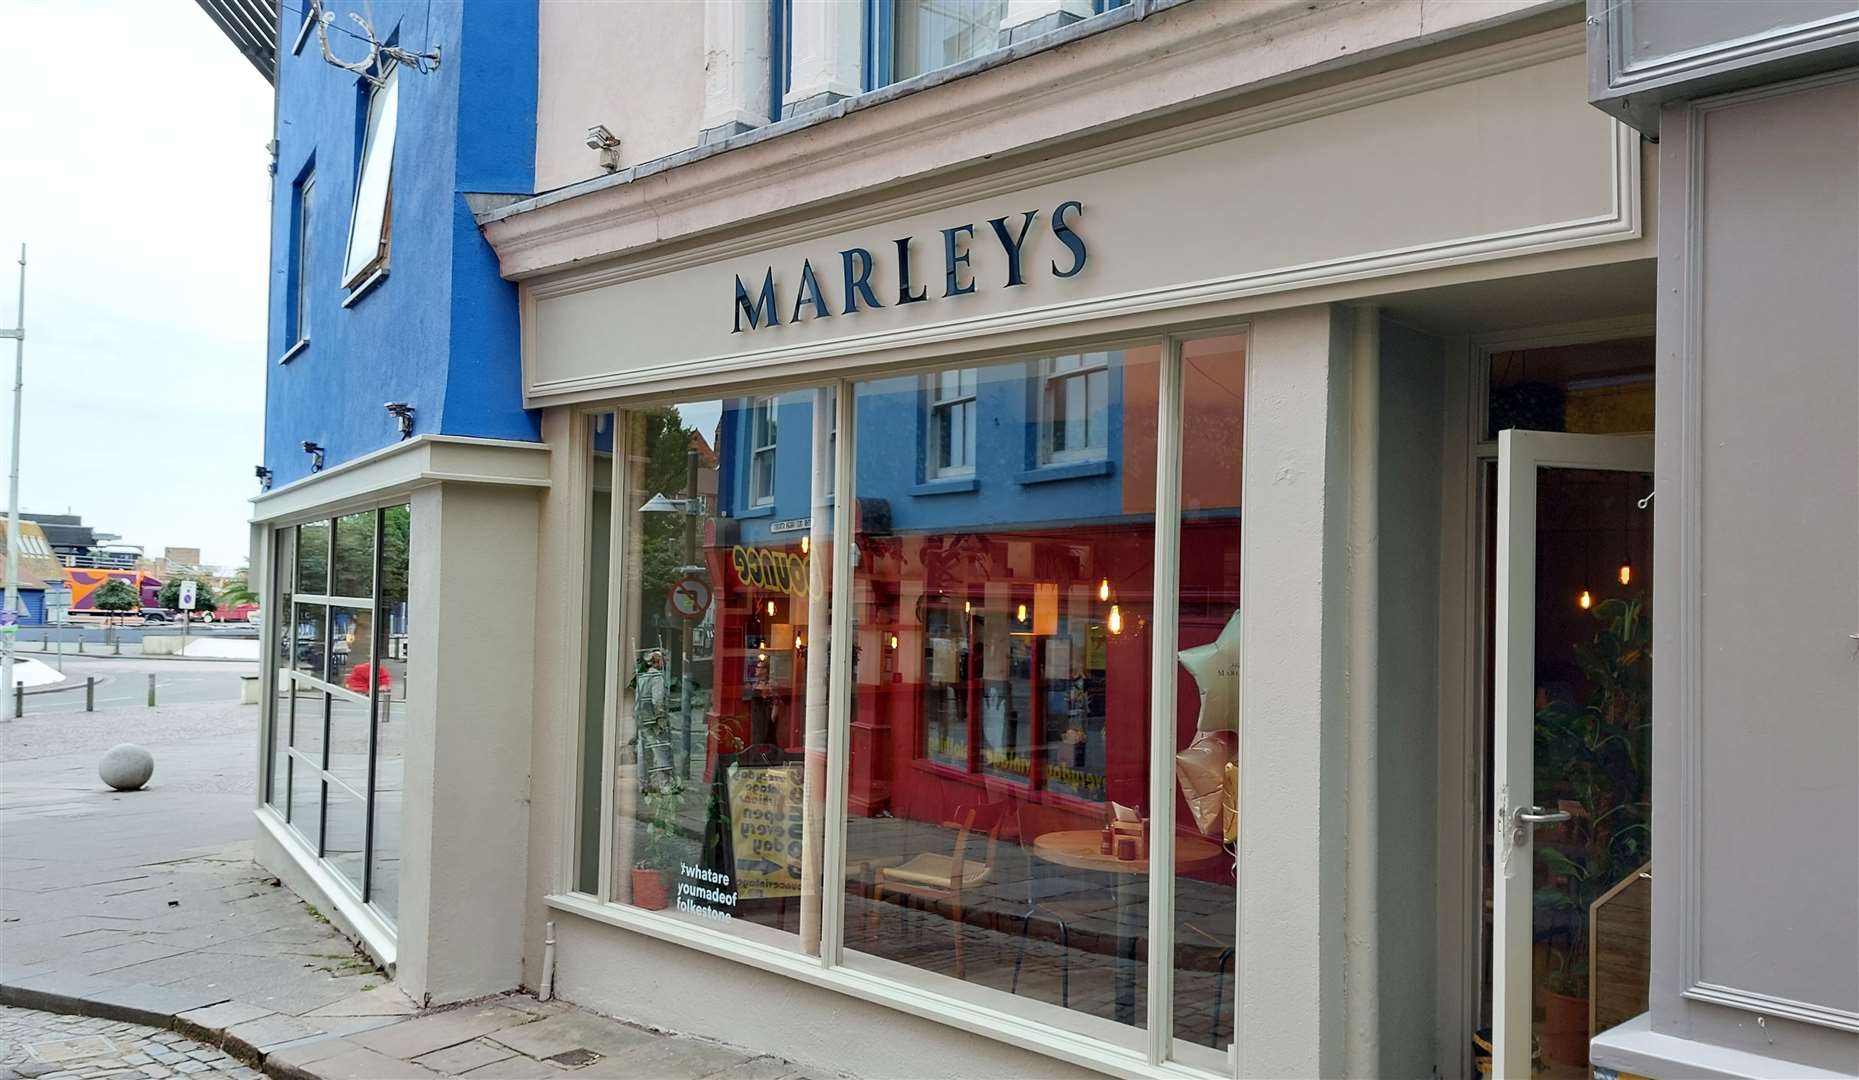 Marleys is now split into three separate sections